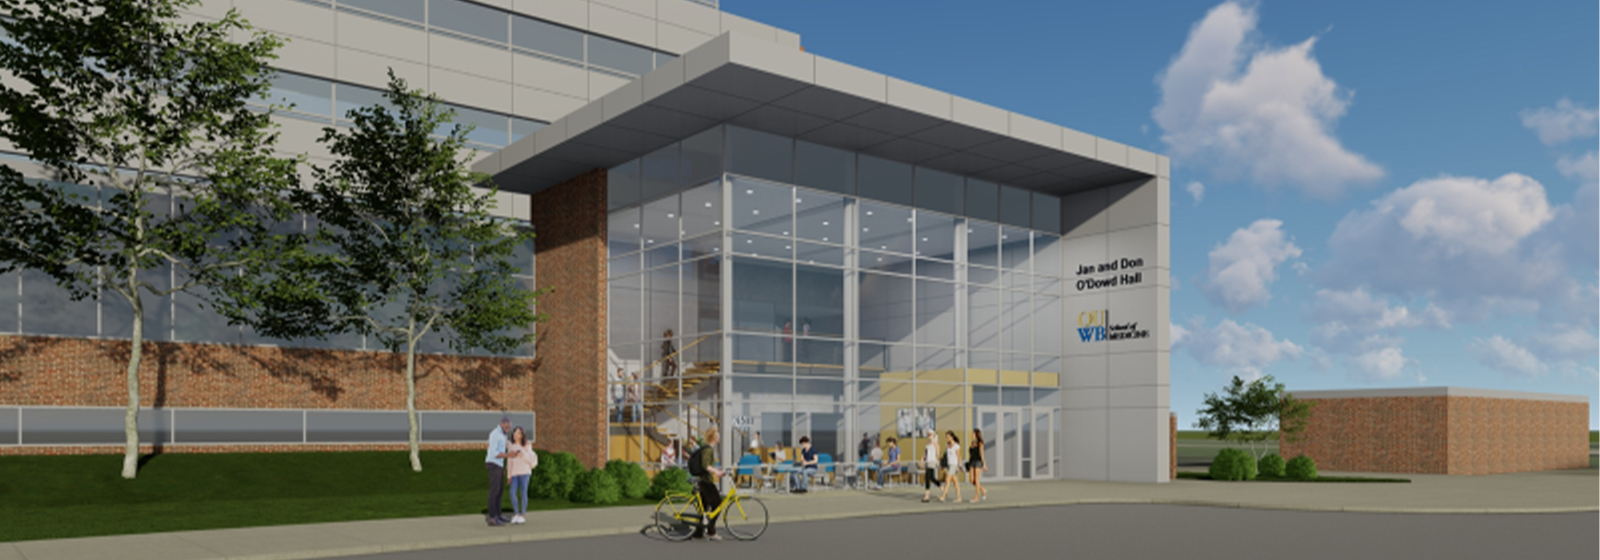 An artist rendering of what the new entrance to O'Dowd Hall might look like